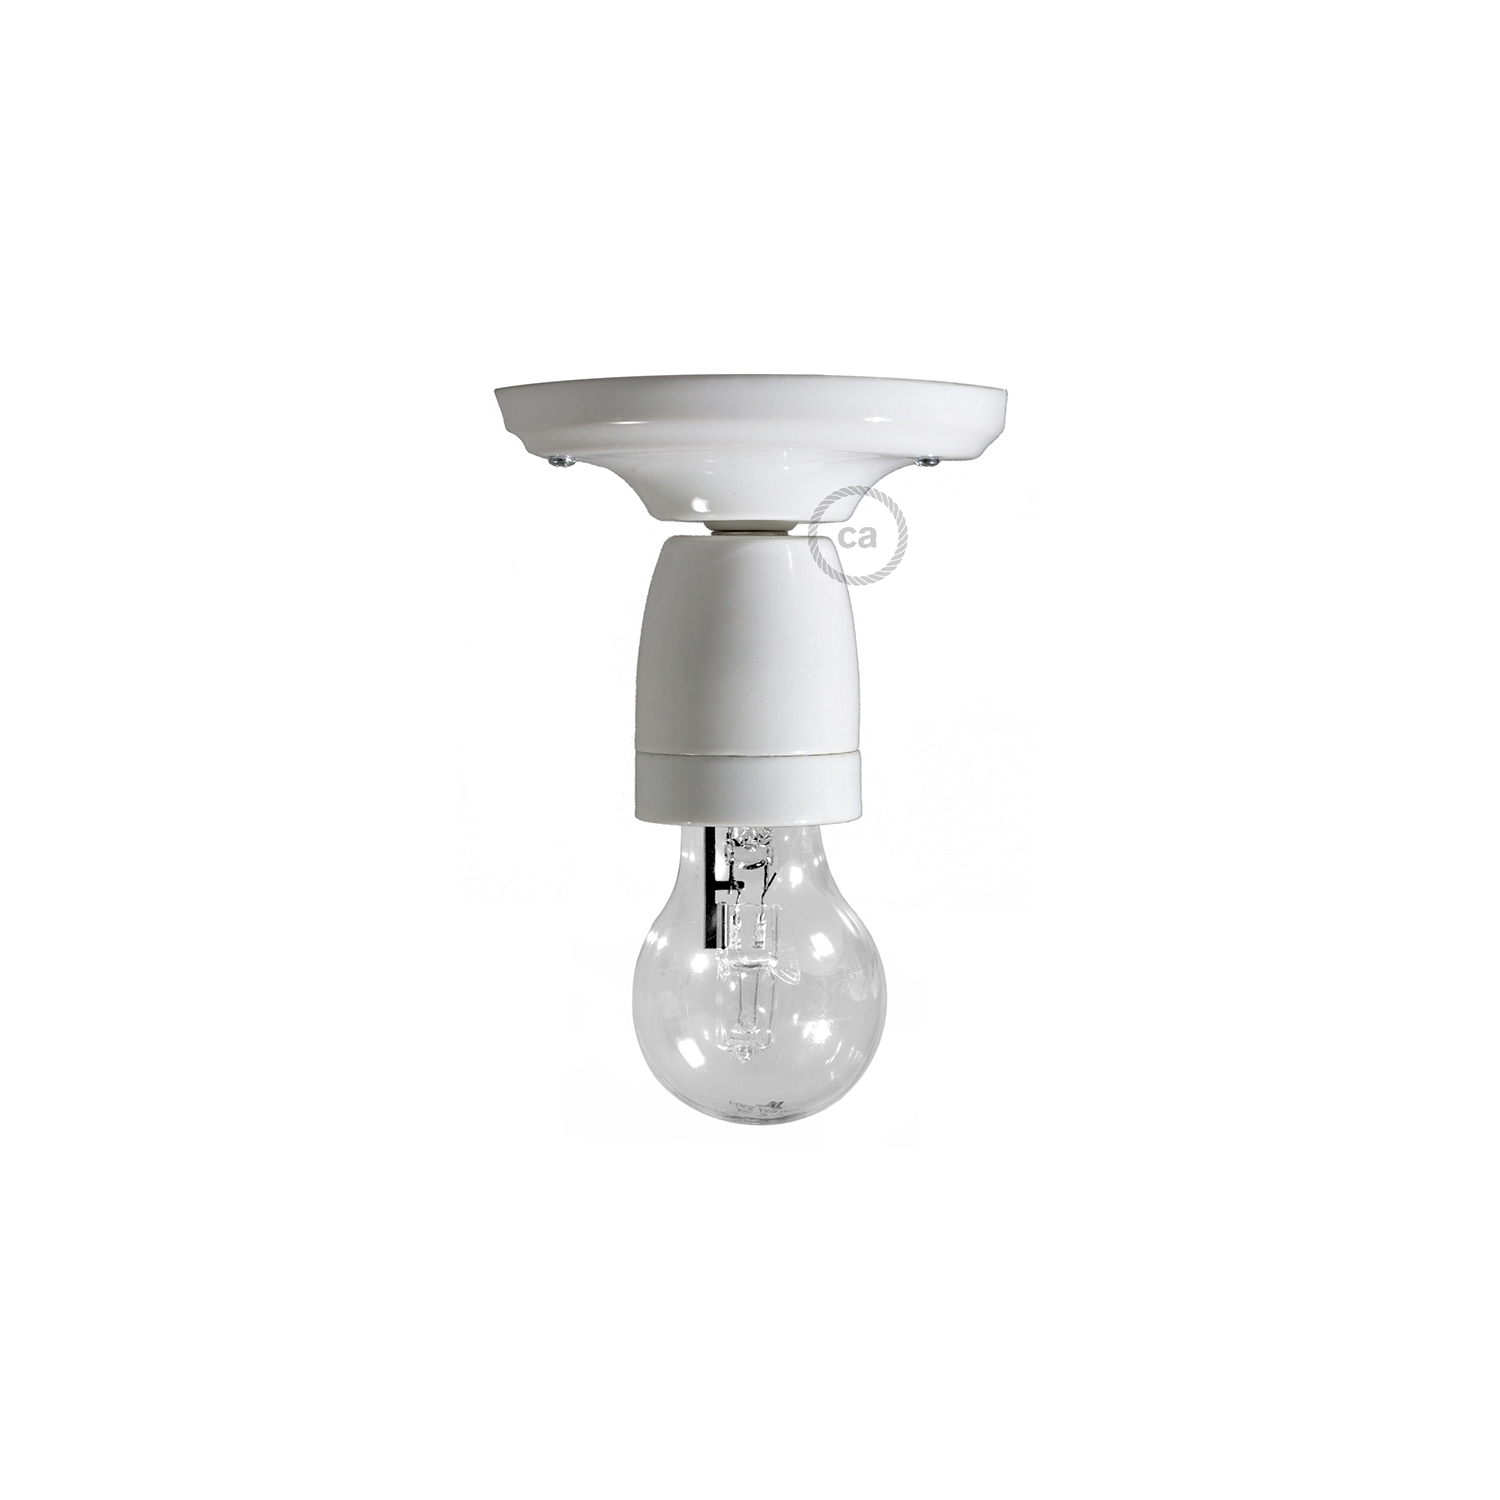 Fermaluce Classic, the wall or ceiling light source in white porcelain.